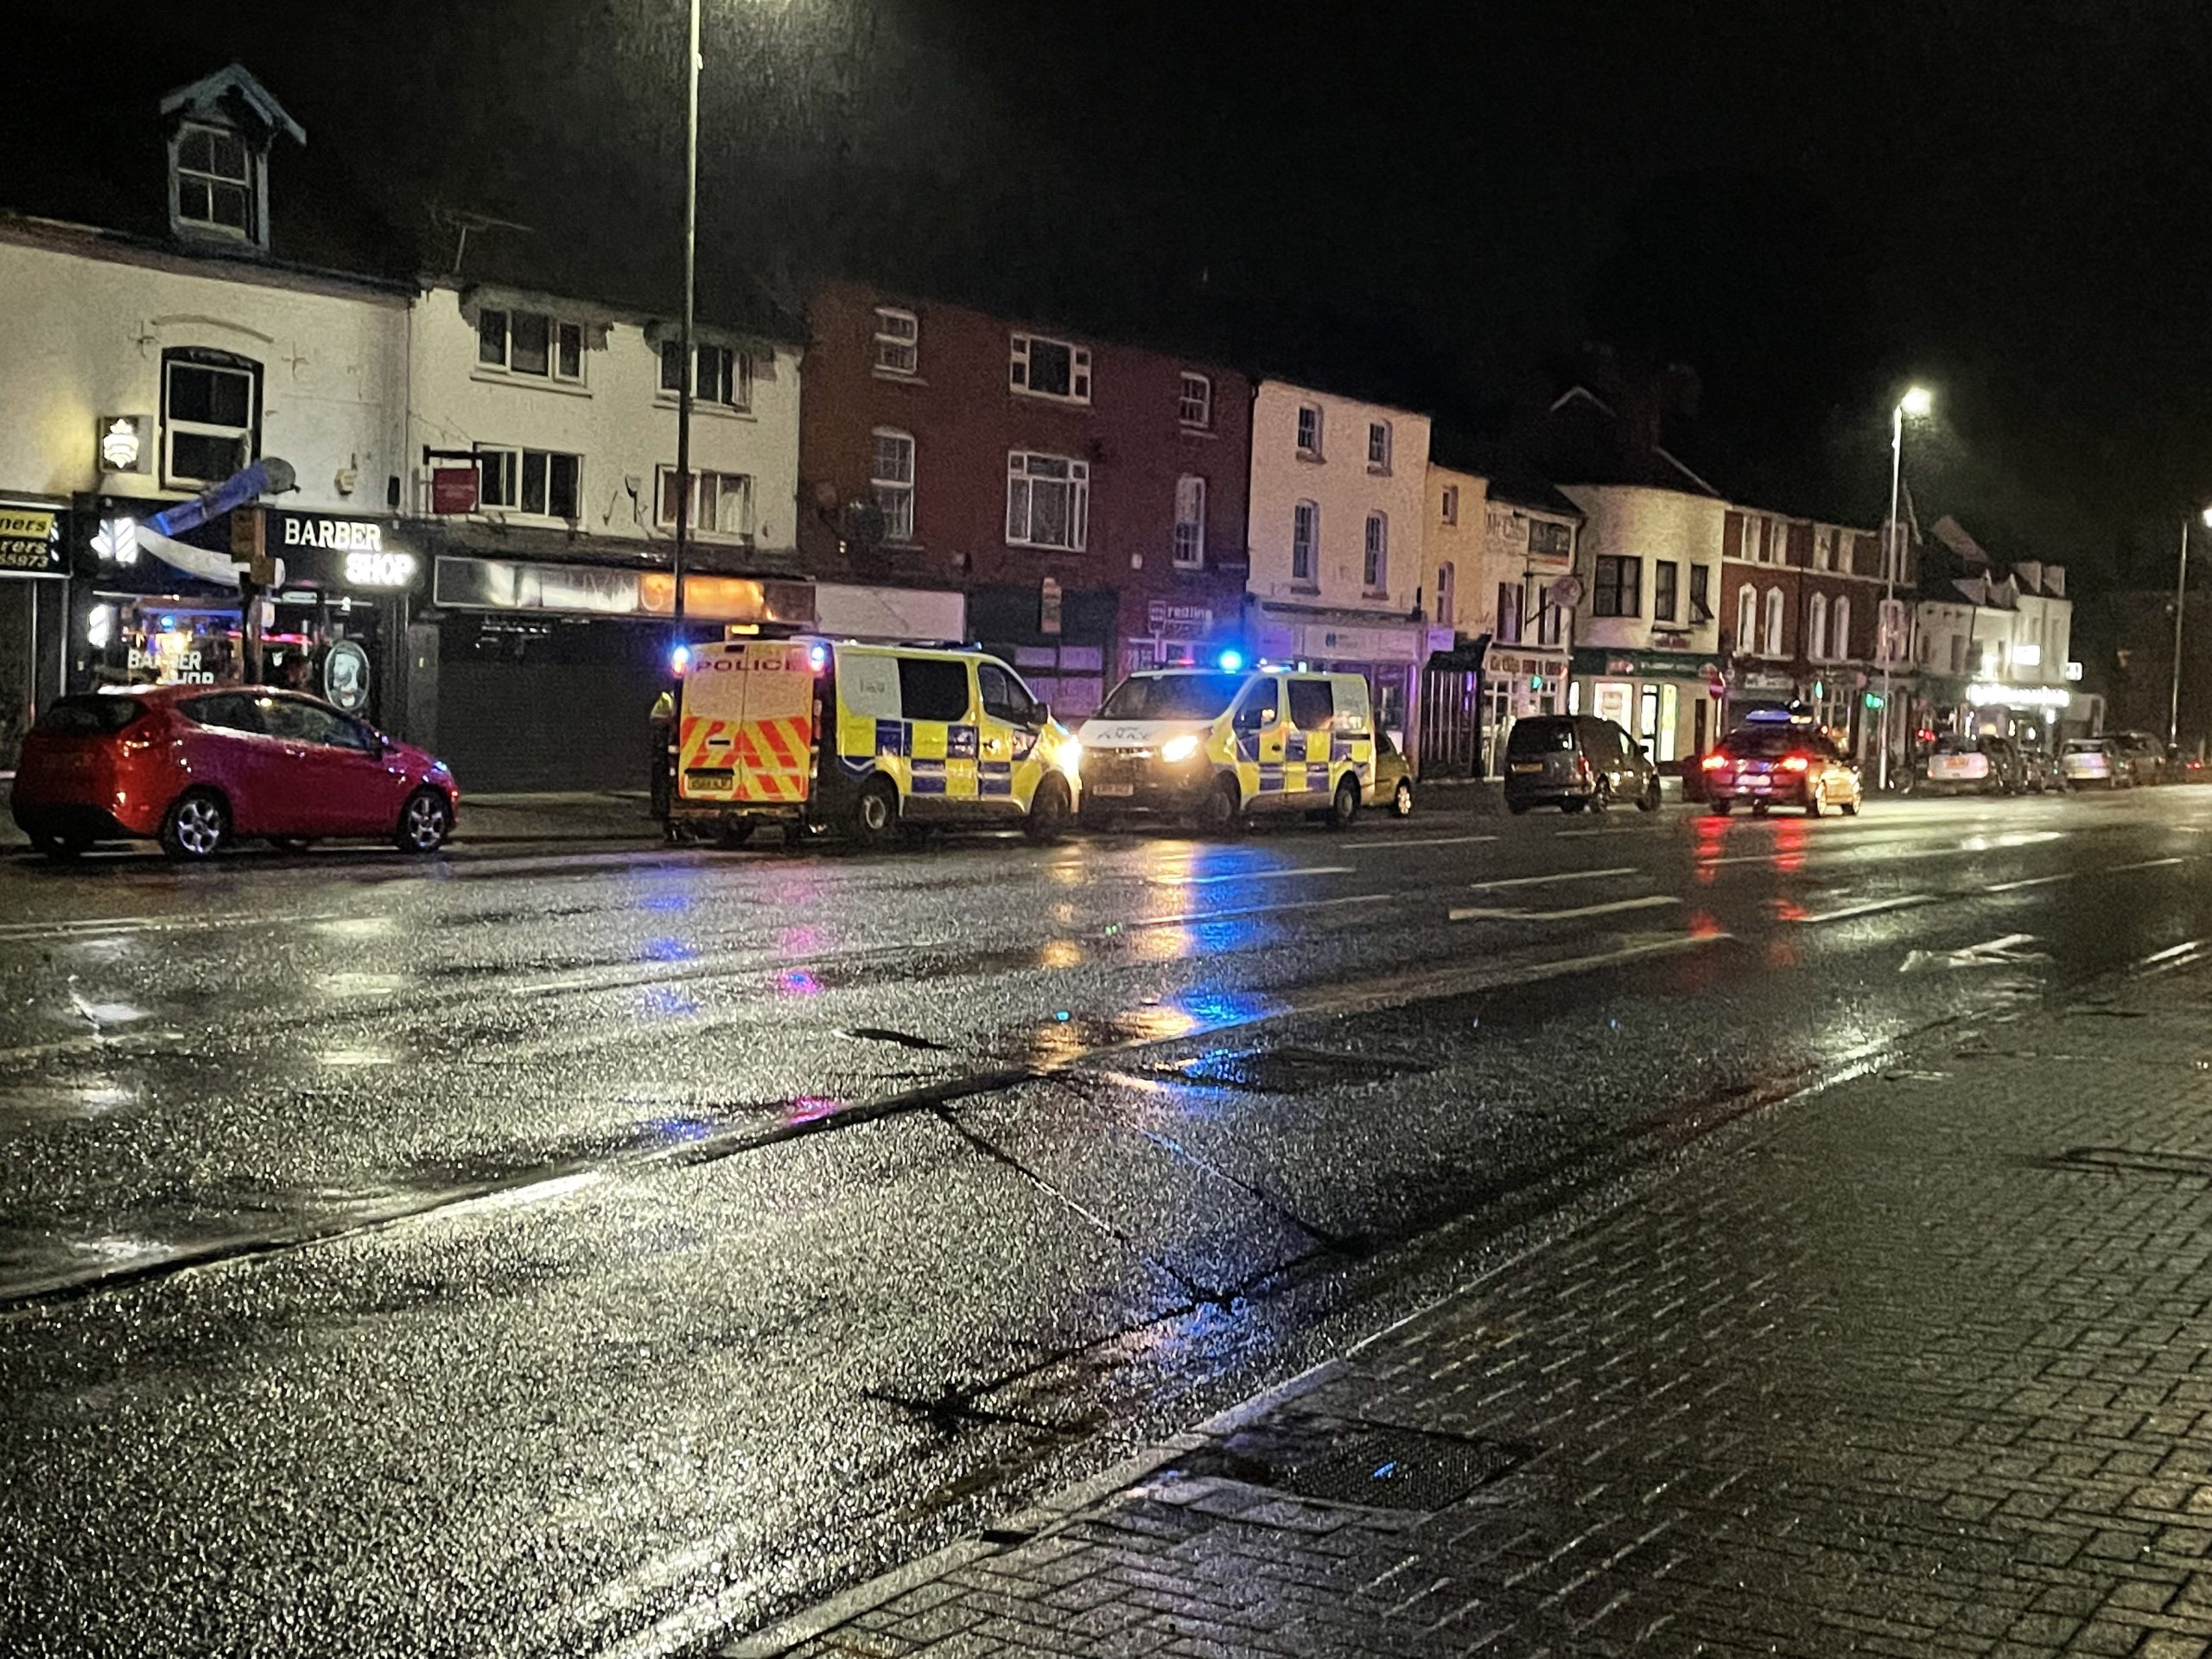 NEWS | Emergency services responding to an incident in Hereford city centre